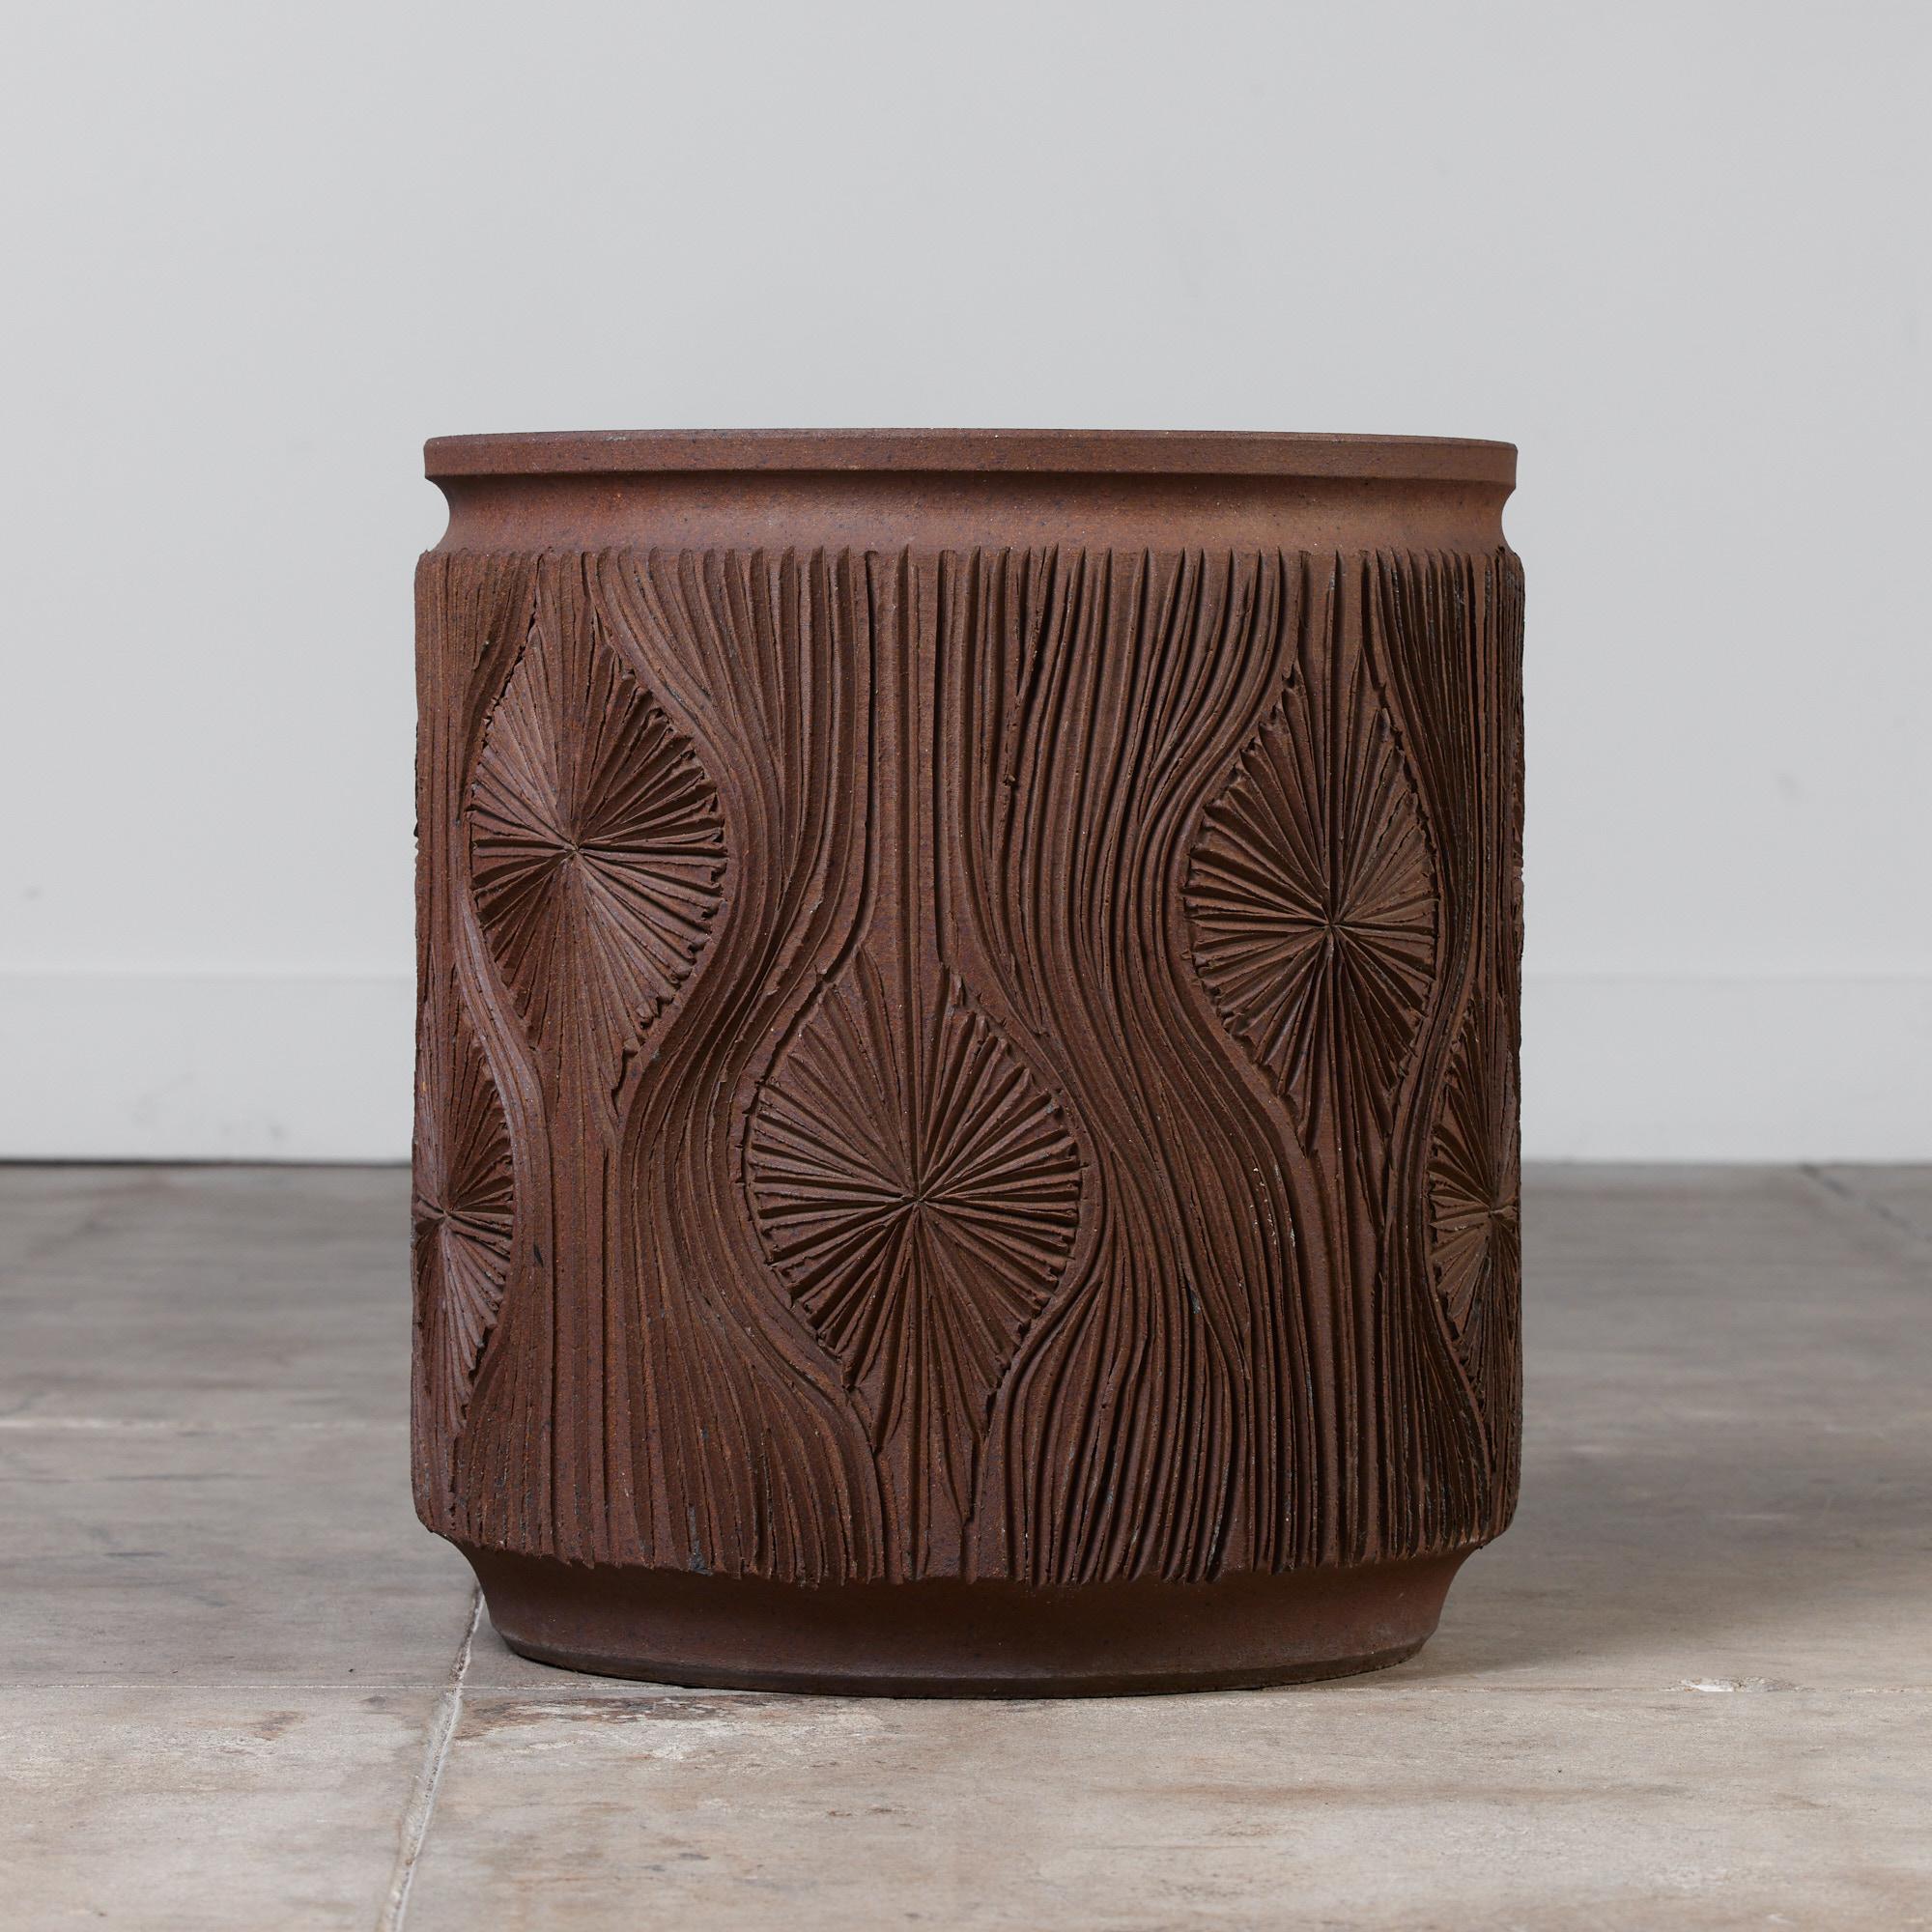 A cylindrical unglazed stoneware planter from Earthgender, David Cressey and Robert Maxwell’s early 1970s project. This 17.5” diameter example is incised in the “Teardrop Sunburst” design with interlocking gestural curves separating a pattern of